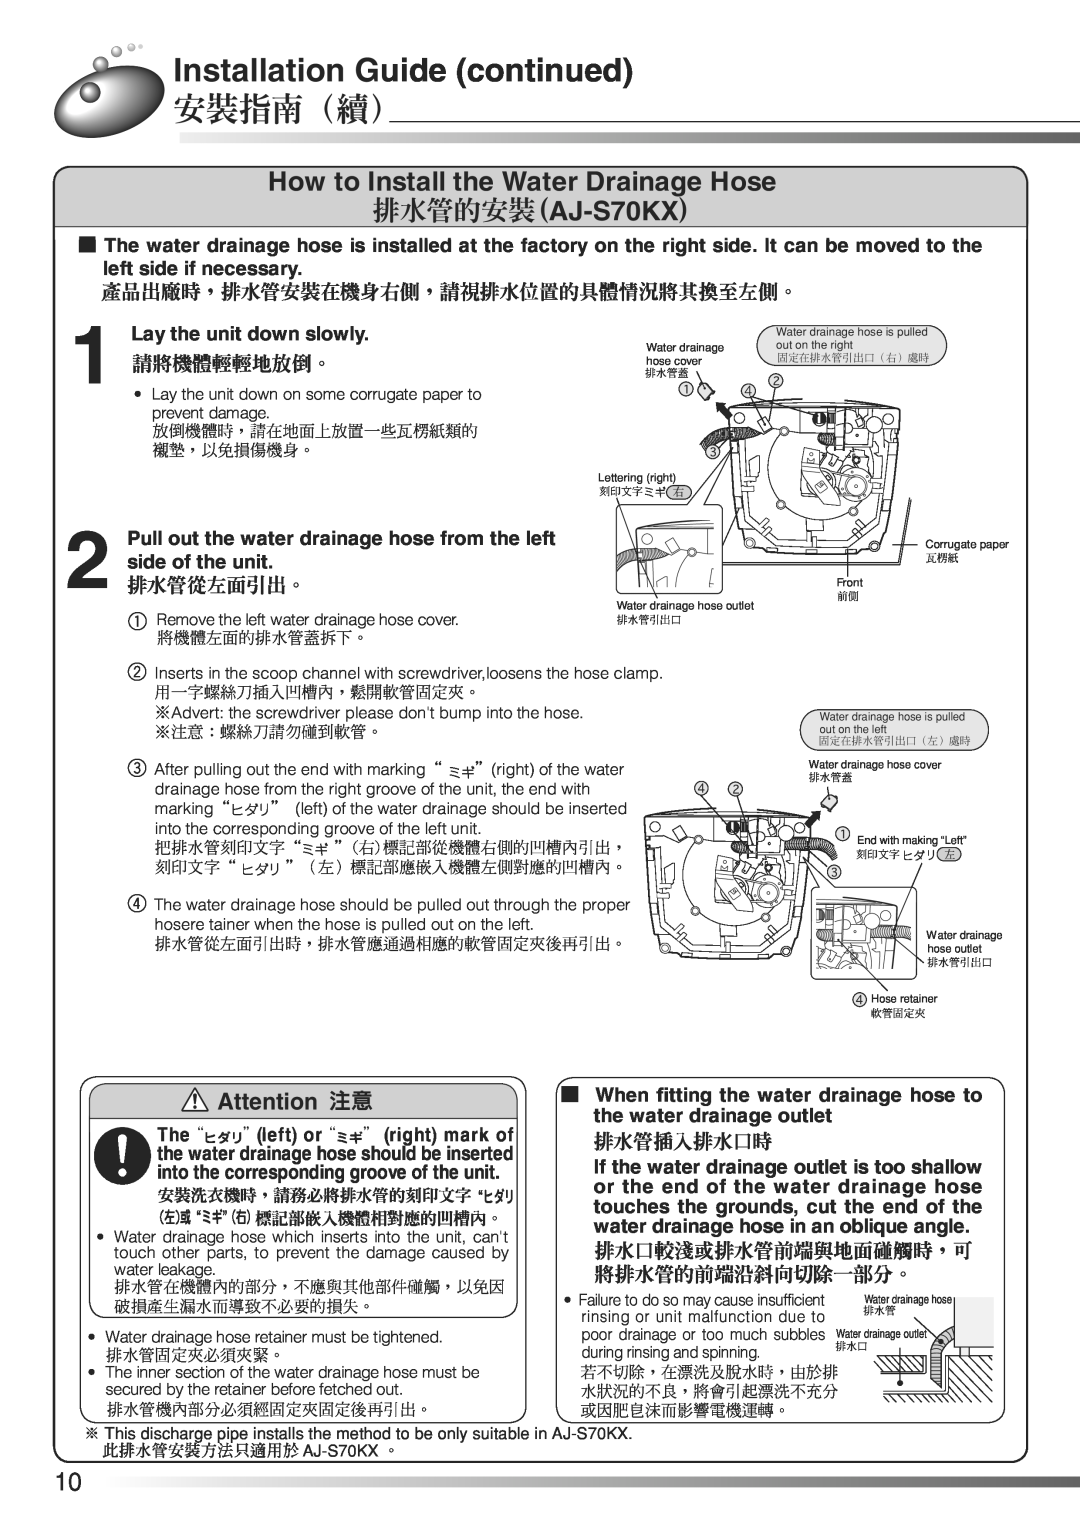 Hitachi AJ-S65KXP How to Install the Water Drainage Hose 排水管的安裝AJ-S70KX, Attention 注意, Installation Guide continued 